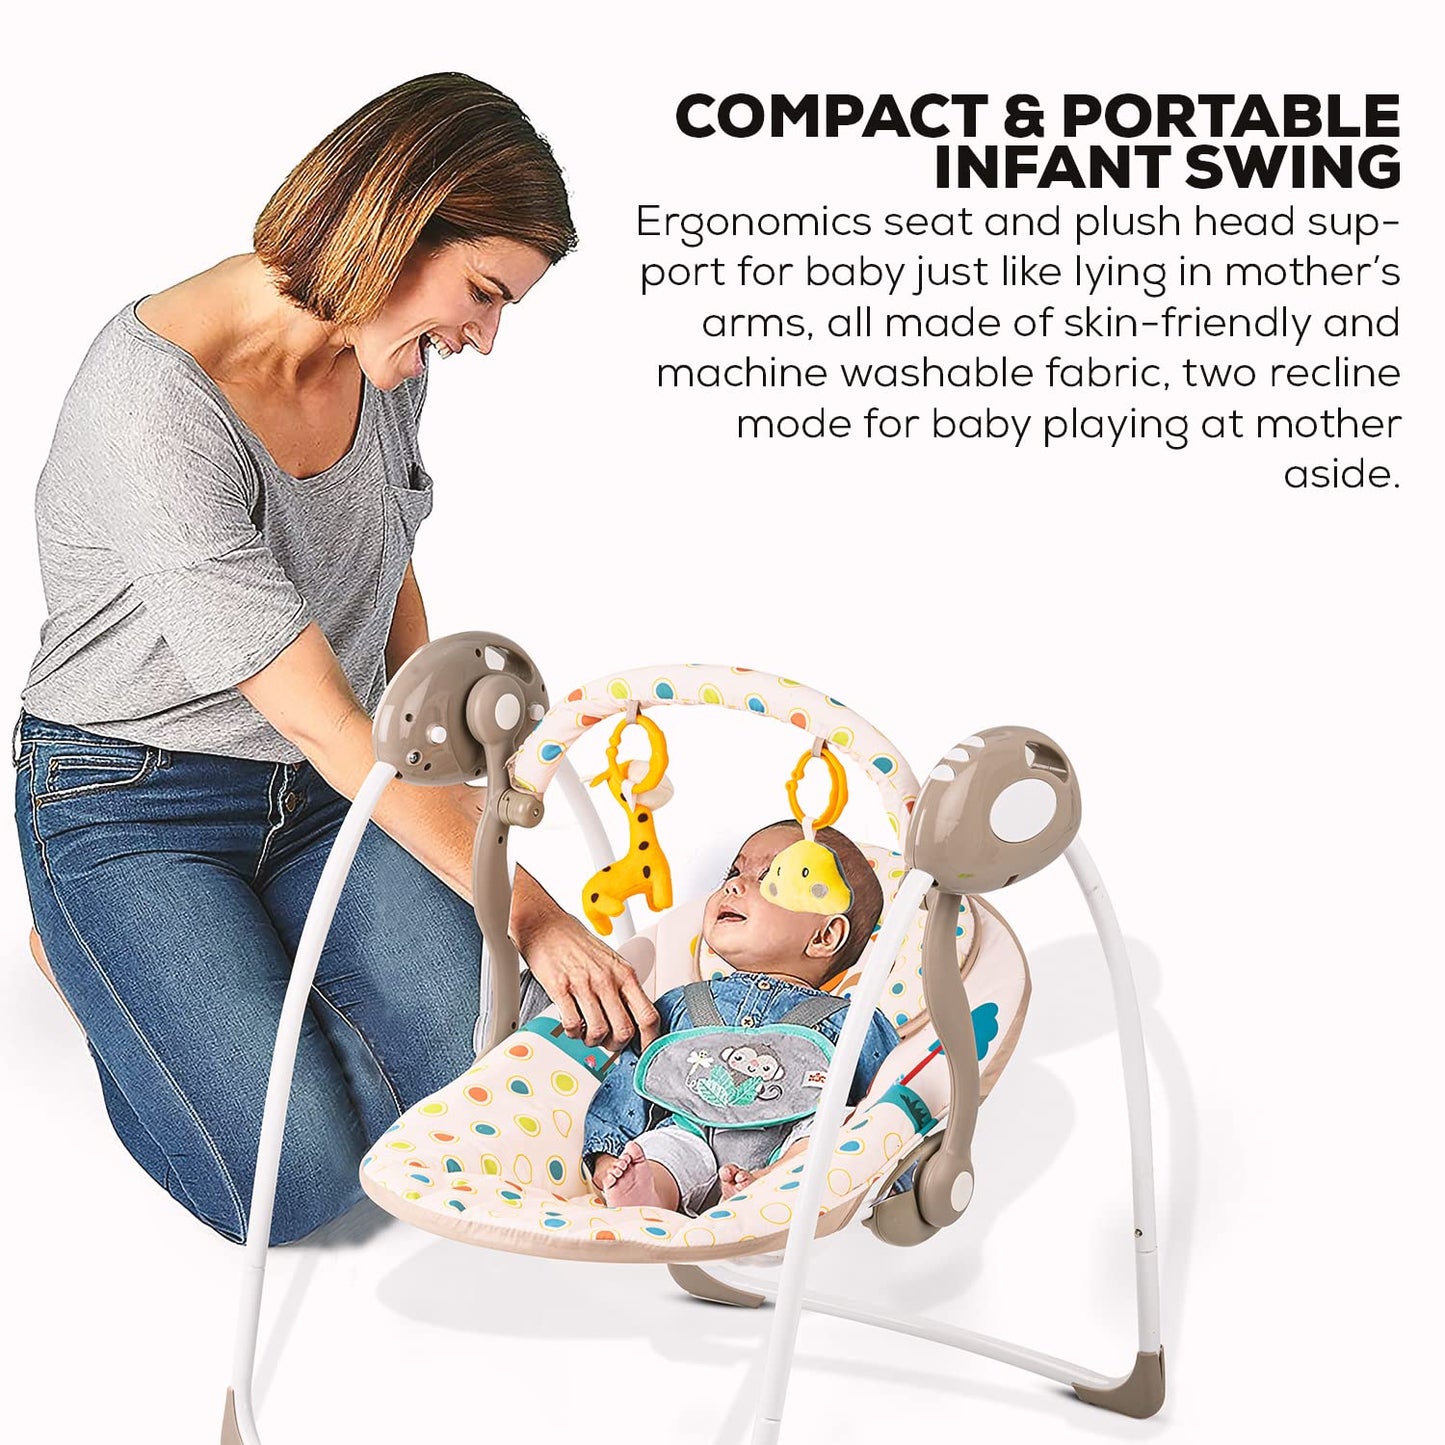 Baybee Amea Automatic Electric Baby Swing Cradle with 2 Position Recline, 6 Speed, Remote Control & 3 Point Safety Belt - Beige